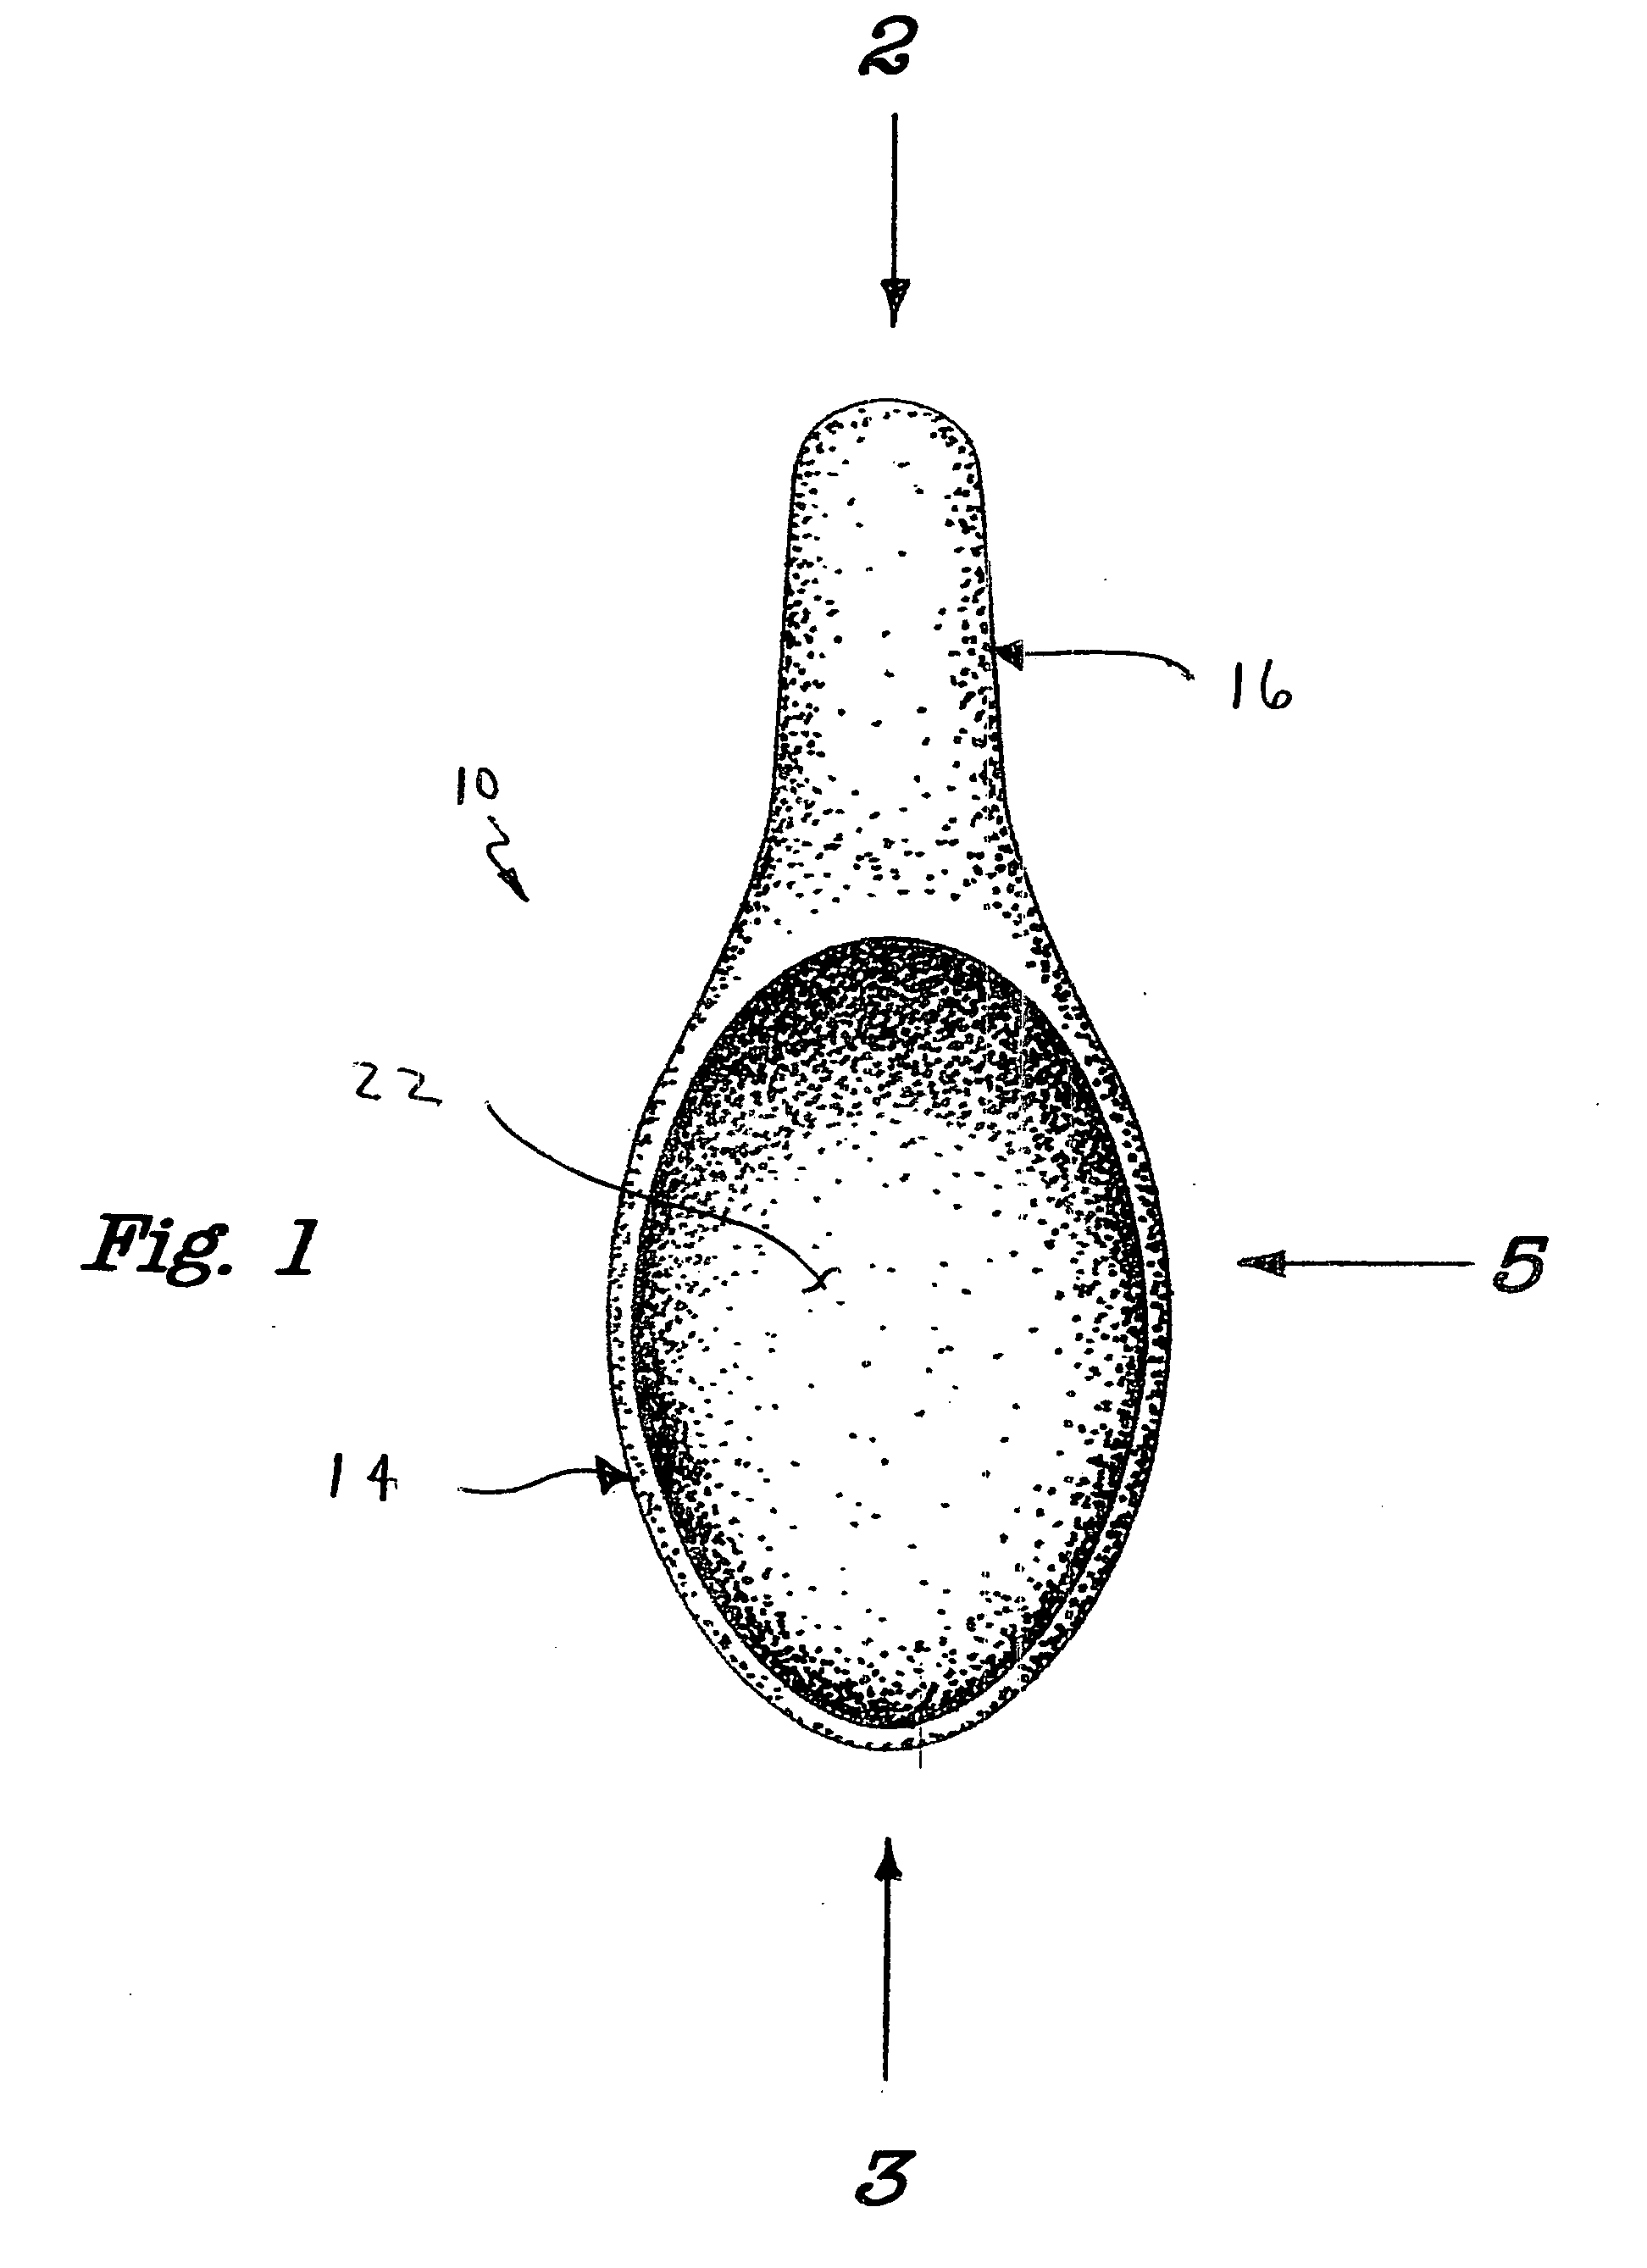 Edible spoon for dissociating into consumable predetermined clumps in order to prevent dissociating into random granules that would make consumption more difficult